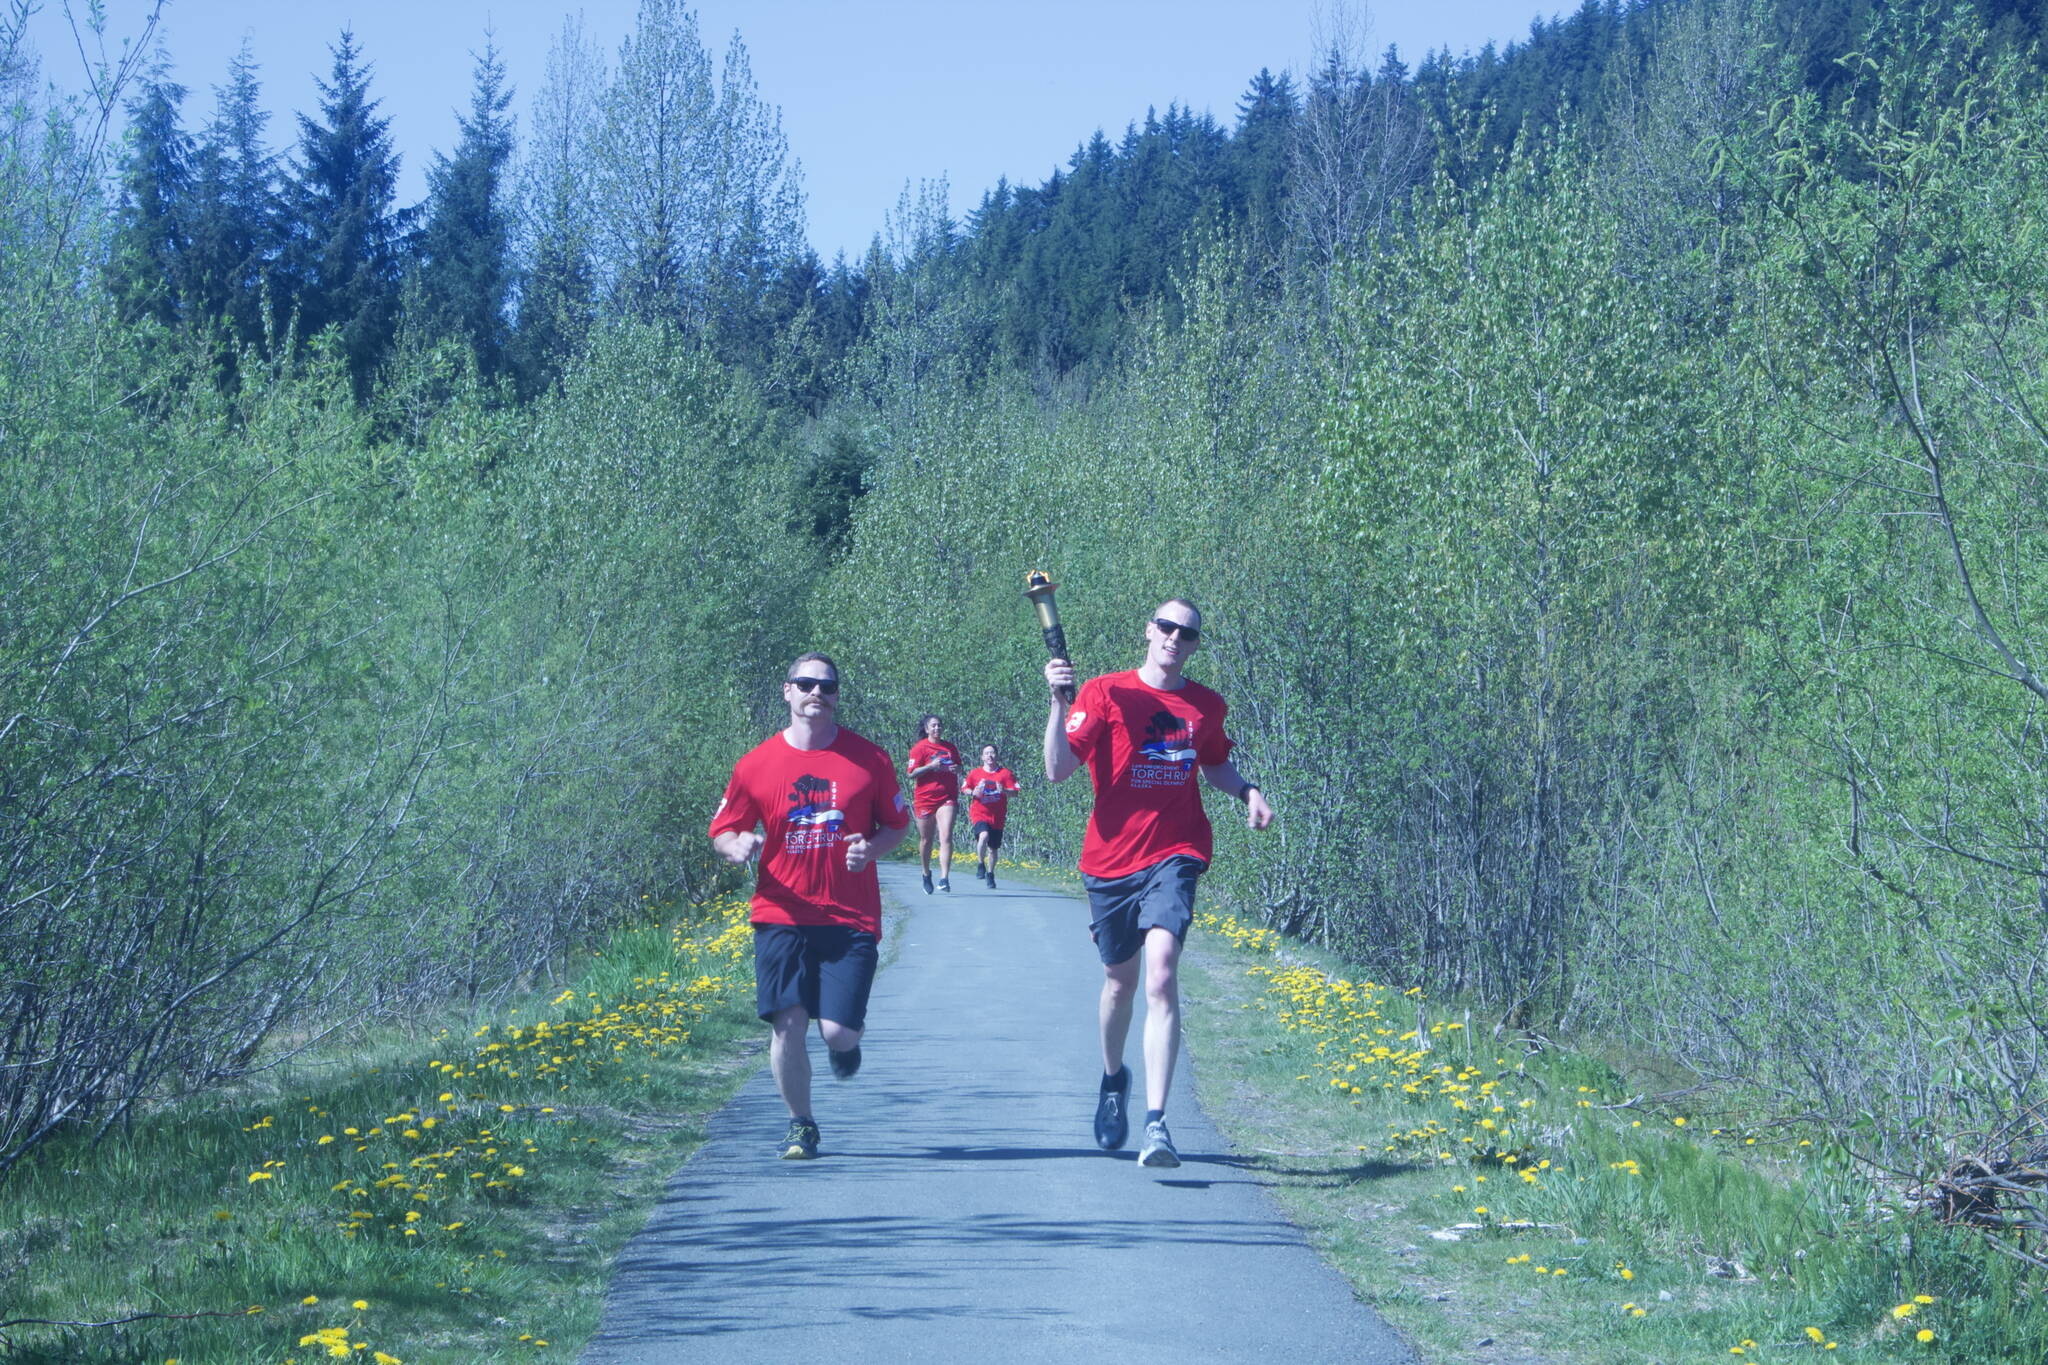 Branden Forst, right, carries the torch alongside other law enforcement officers on the trail portion of the Alaska Law Enforcement Torch Run in Juneau on Saturday. (Mark Sabbatini / Juneau Empire)